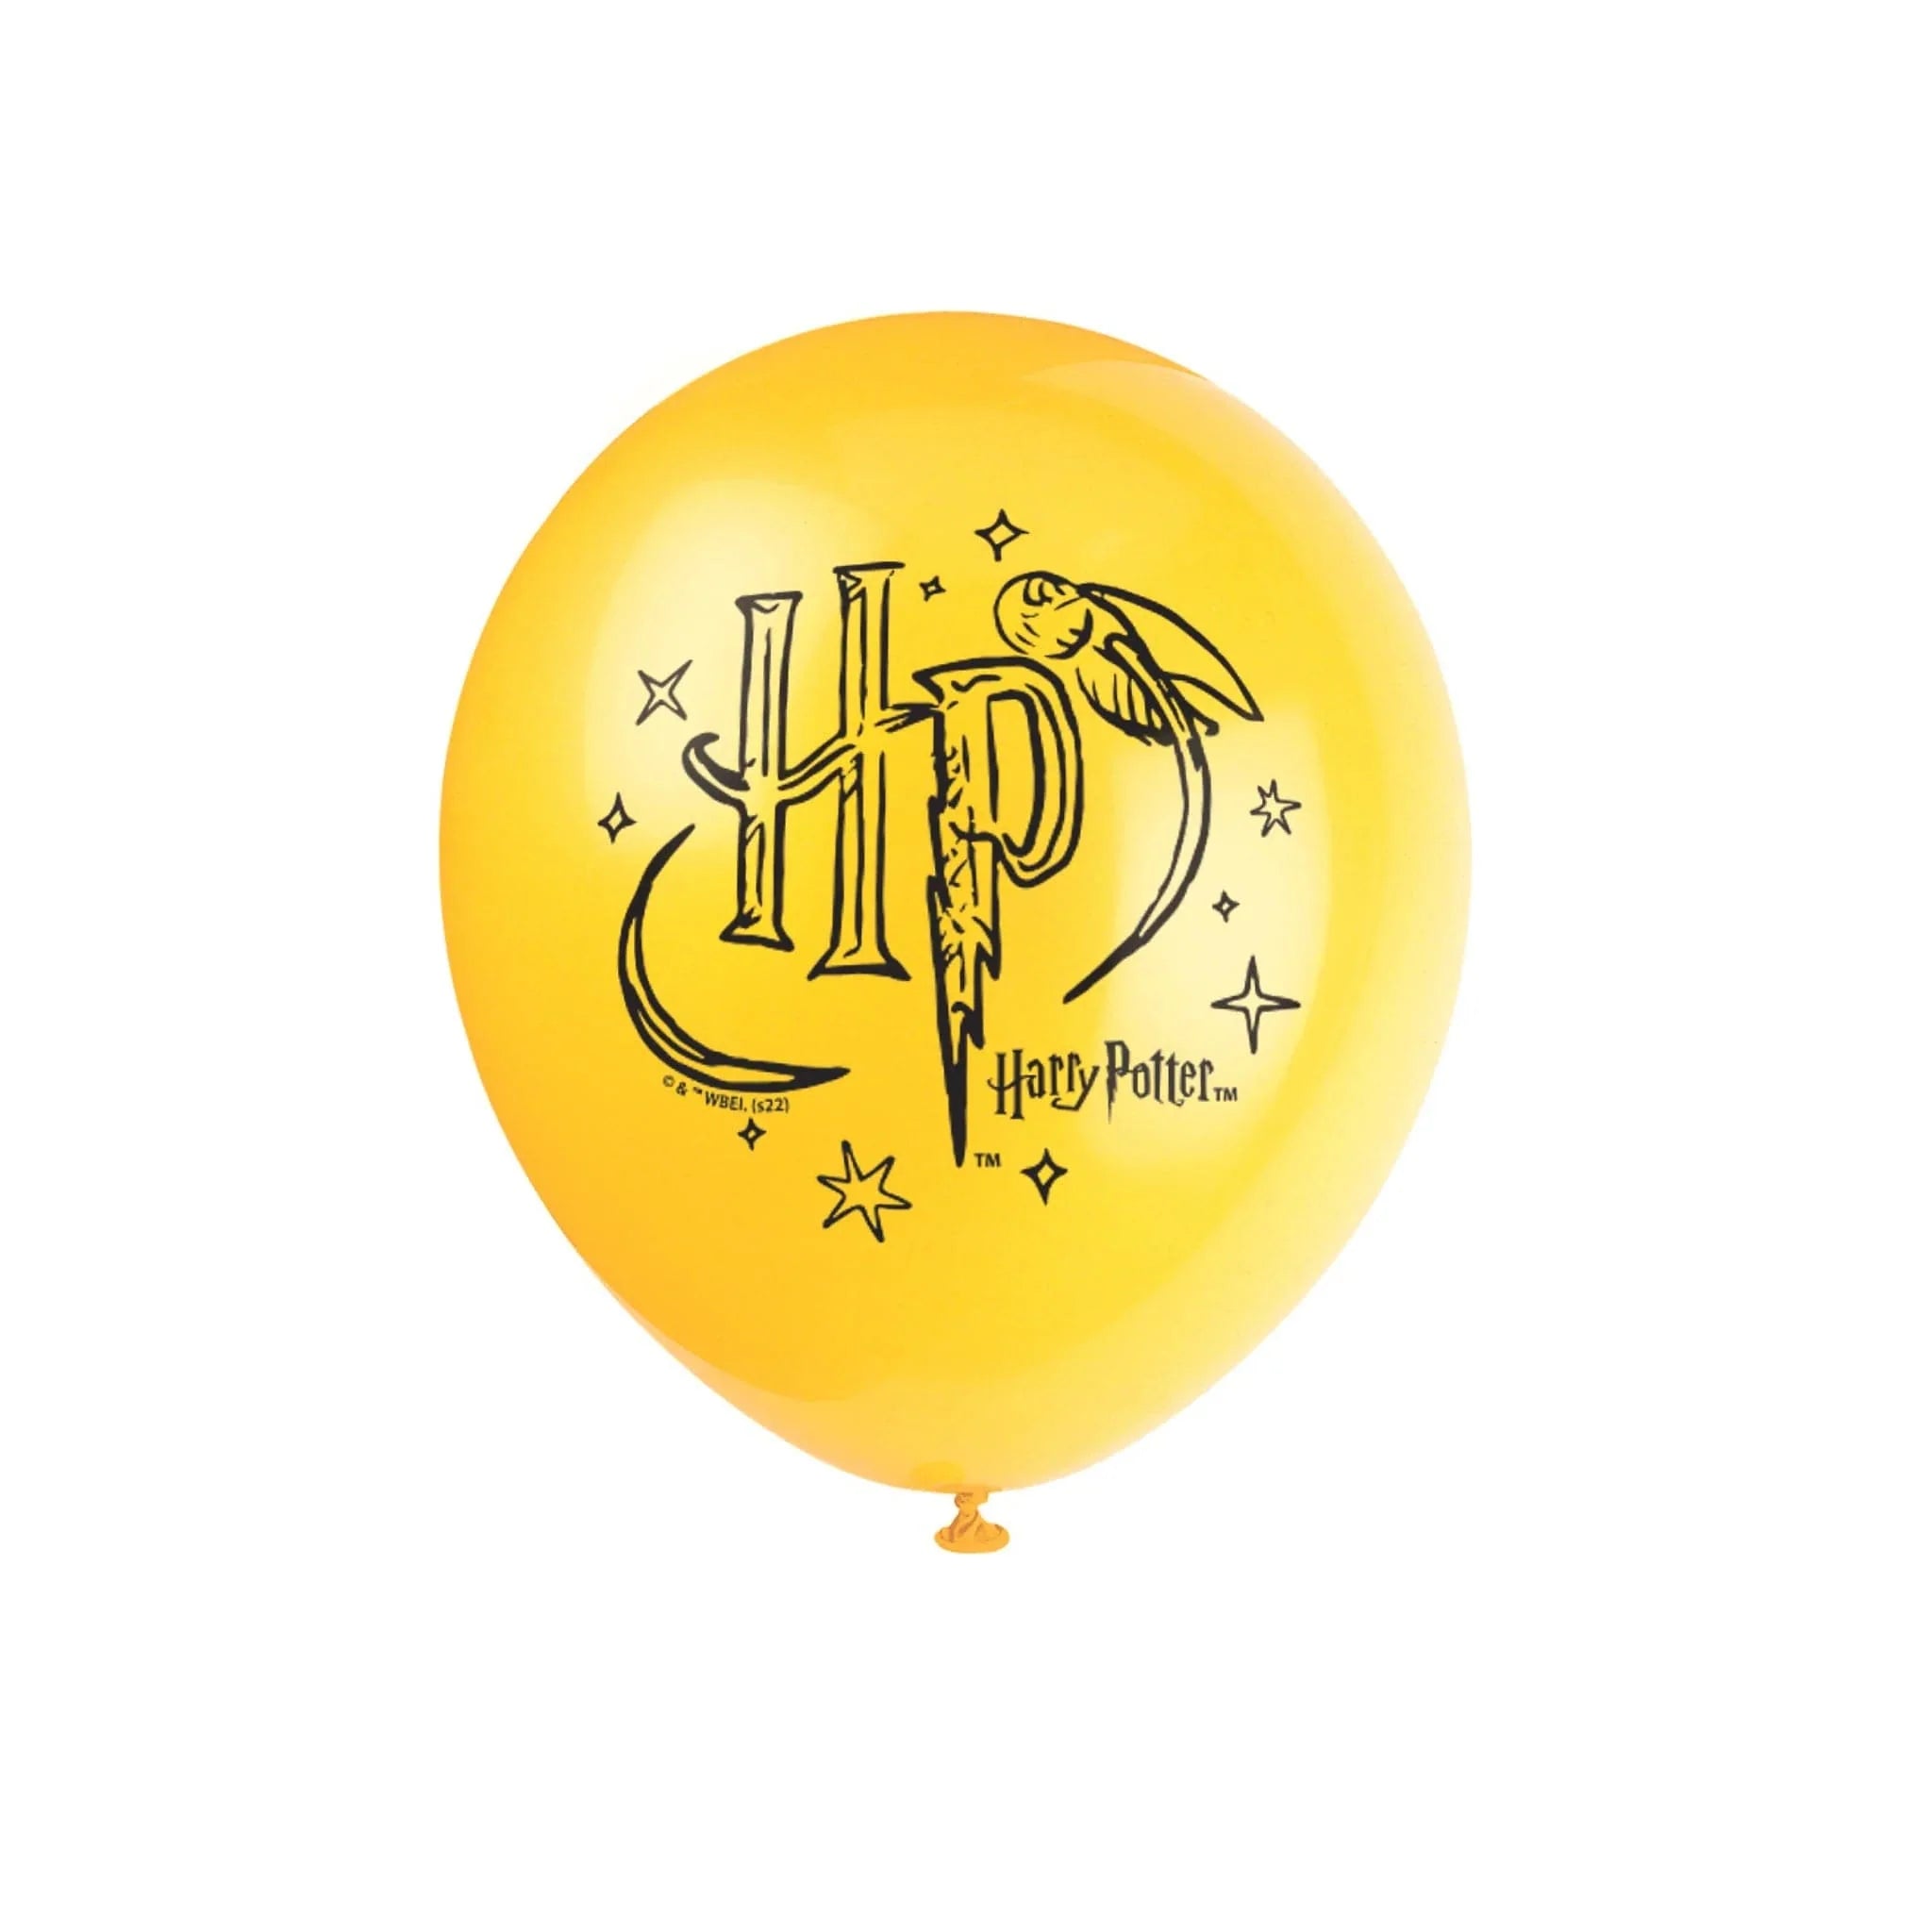 Harry Potter 12" Latex Balloons 8pk - Kids Party Craft